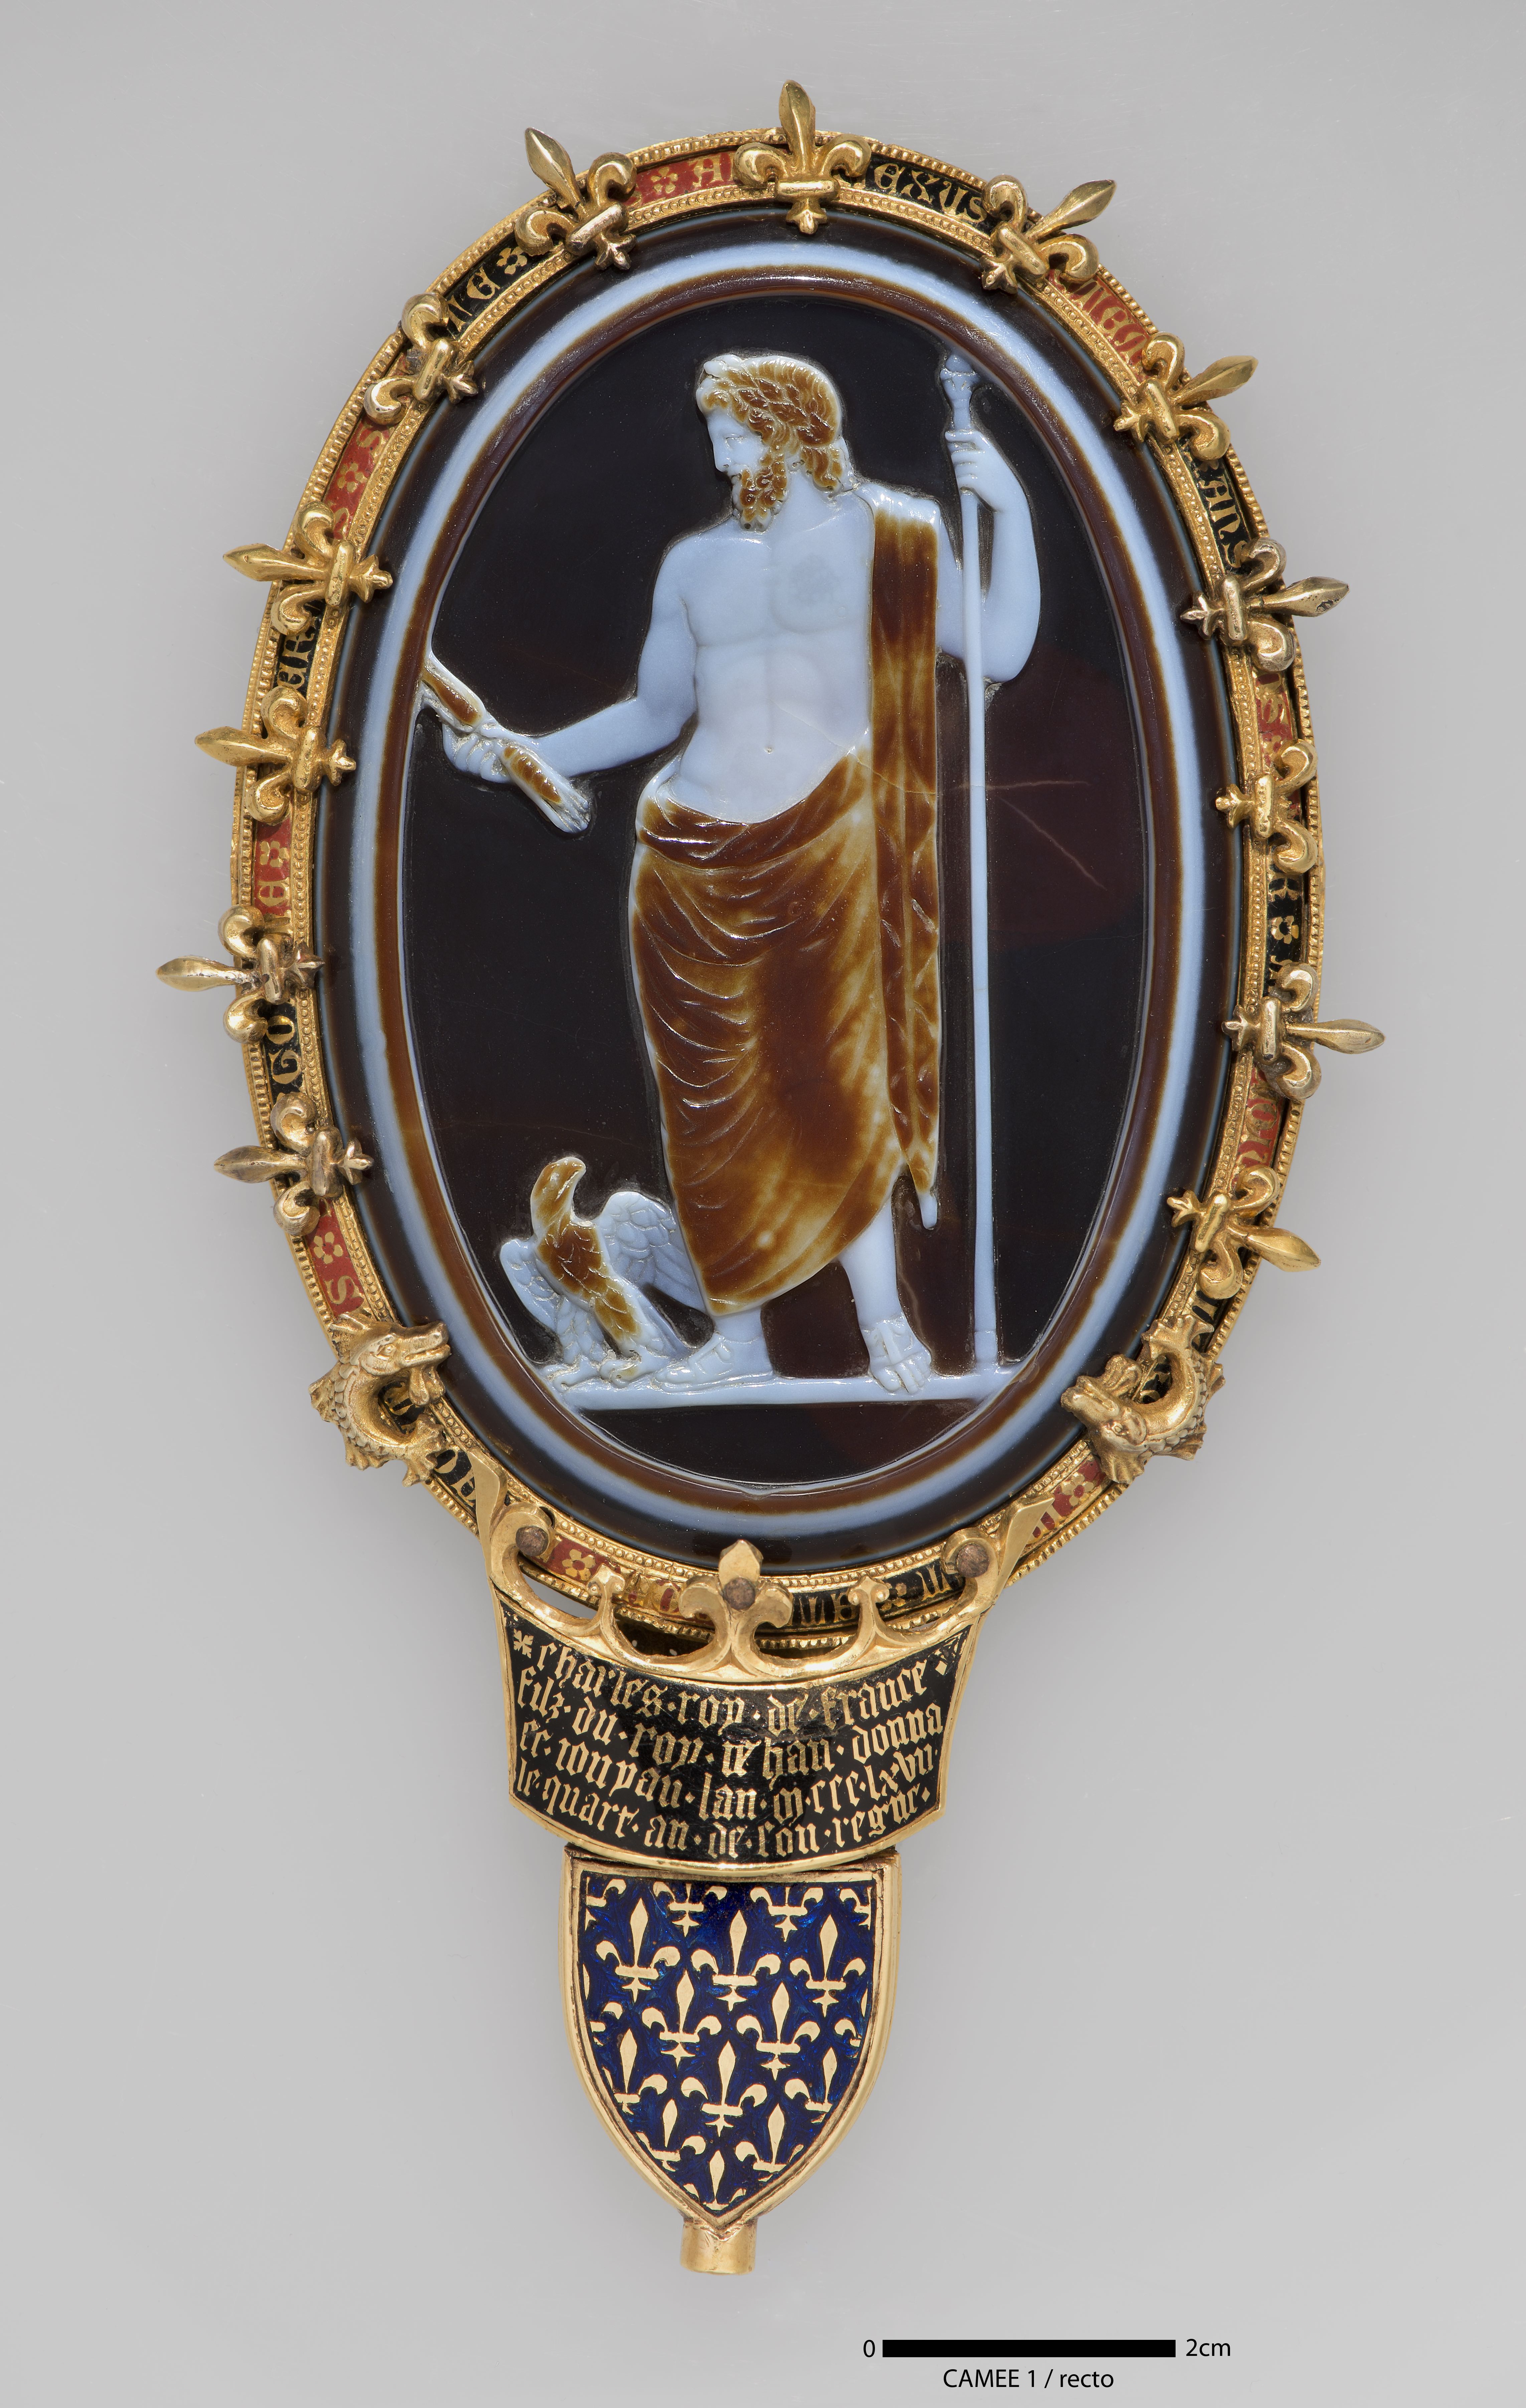 Object History and Significance: The Cameo of Jupiter (Chartres)